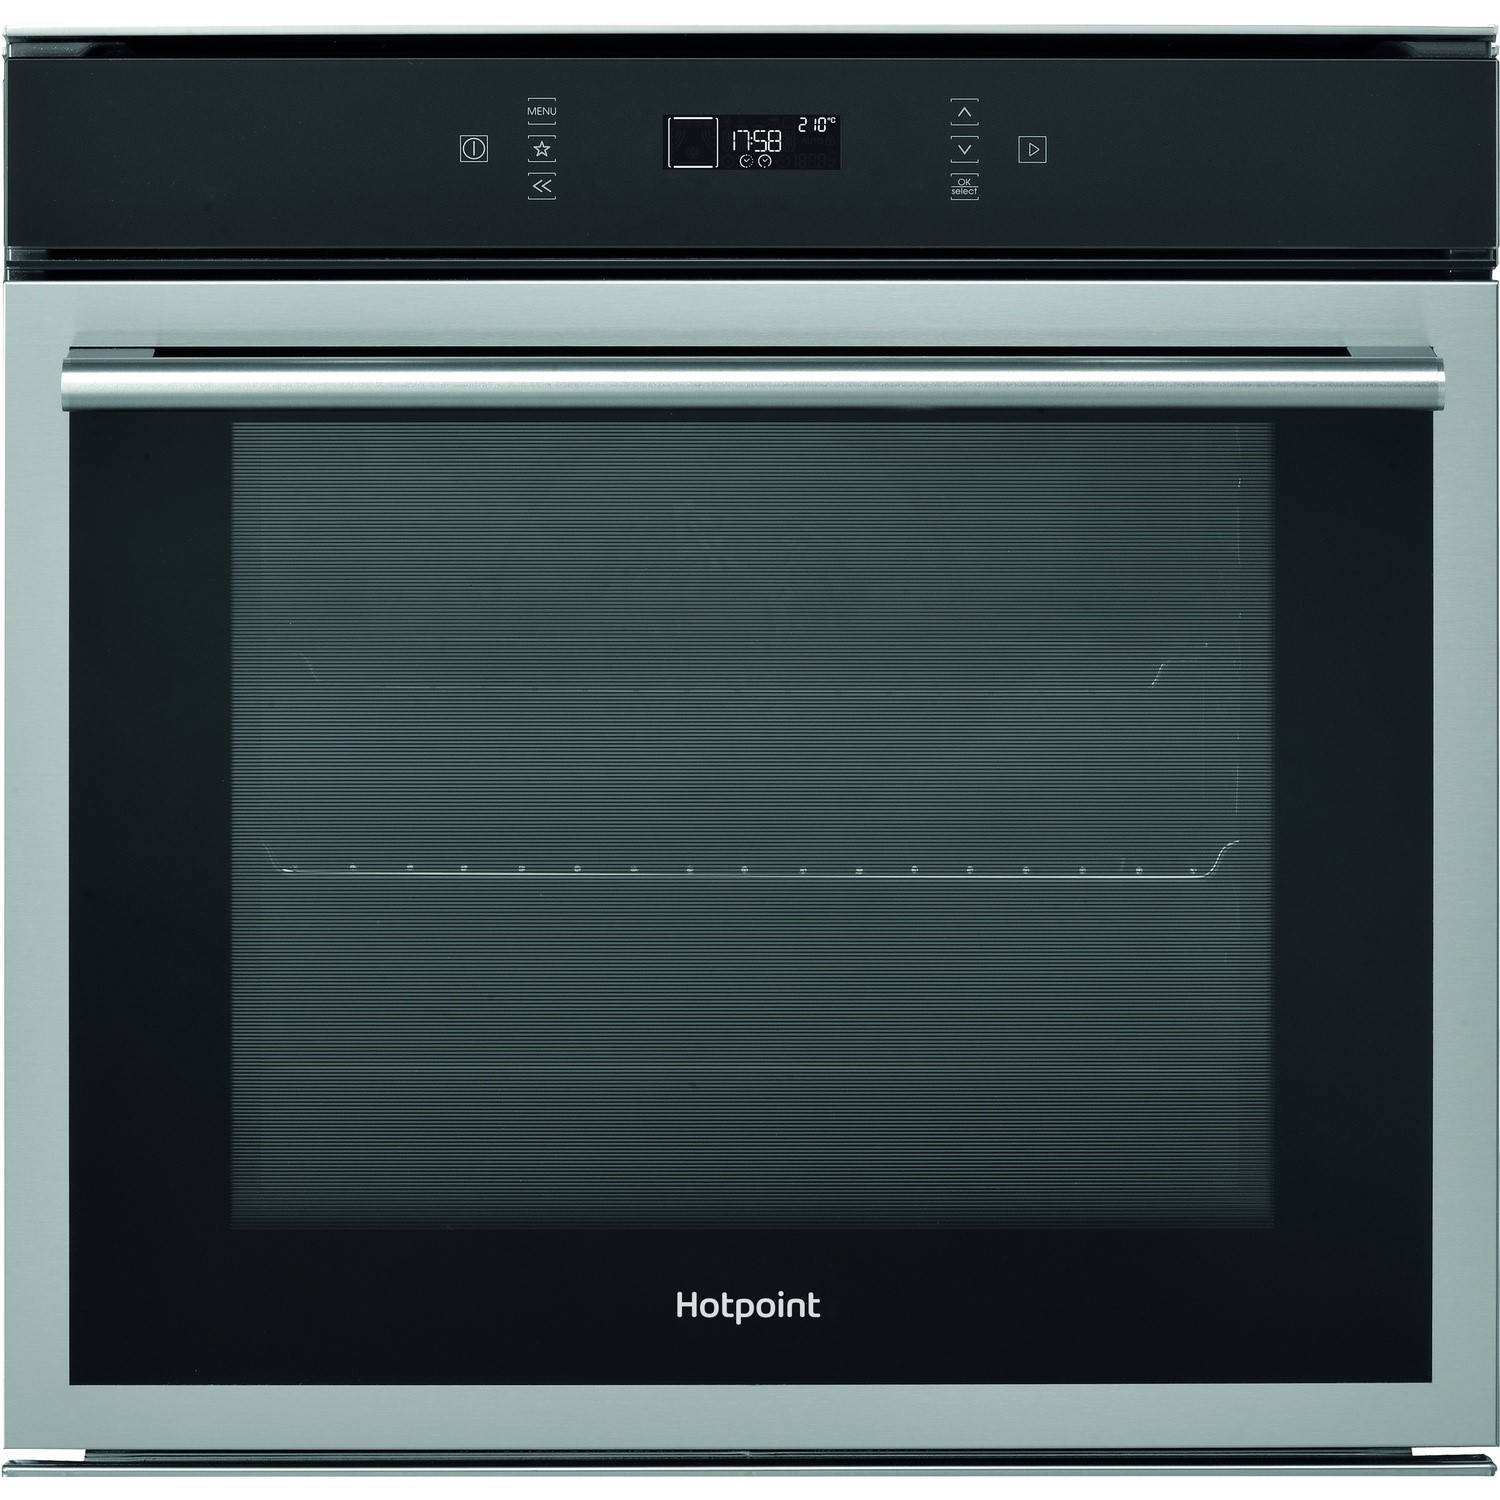 Refurbished Hotpoint SI6874SHIX Single Built In Electric Oven Stainless Steel